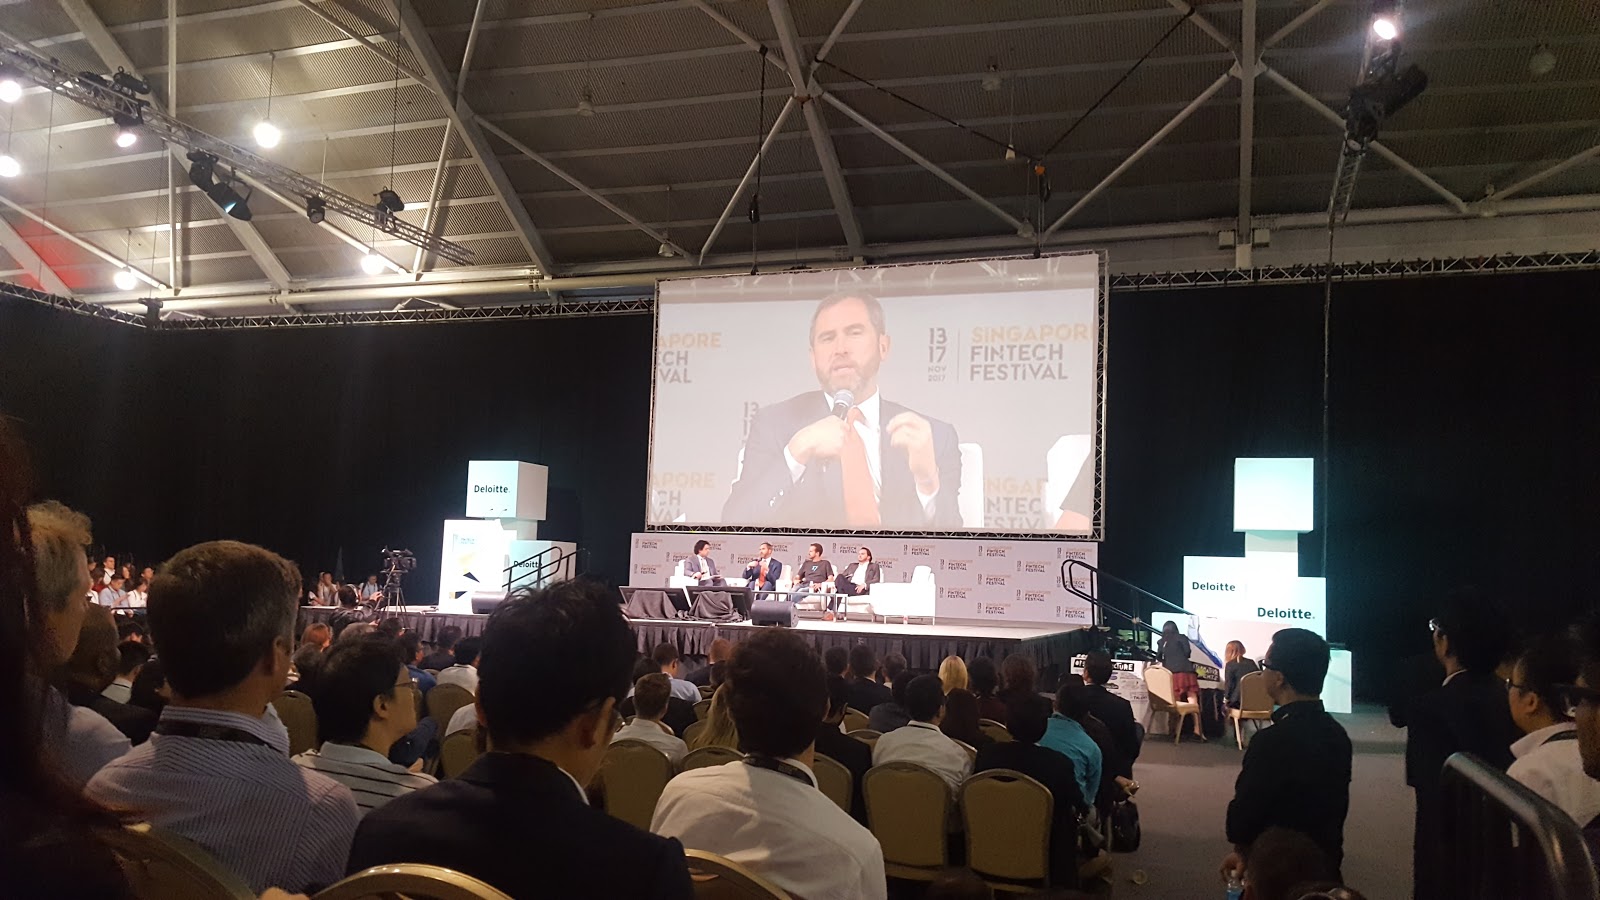 Brad Garlinghouse, CEO of Ripple, breaking down altcoin hype for the audience. Photo credit: Lucia Ziyuan